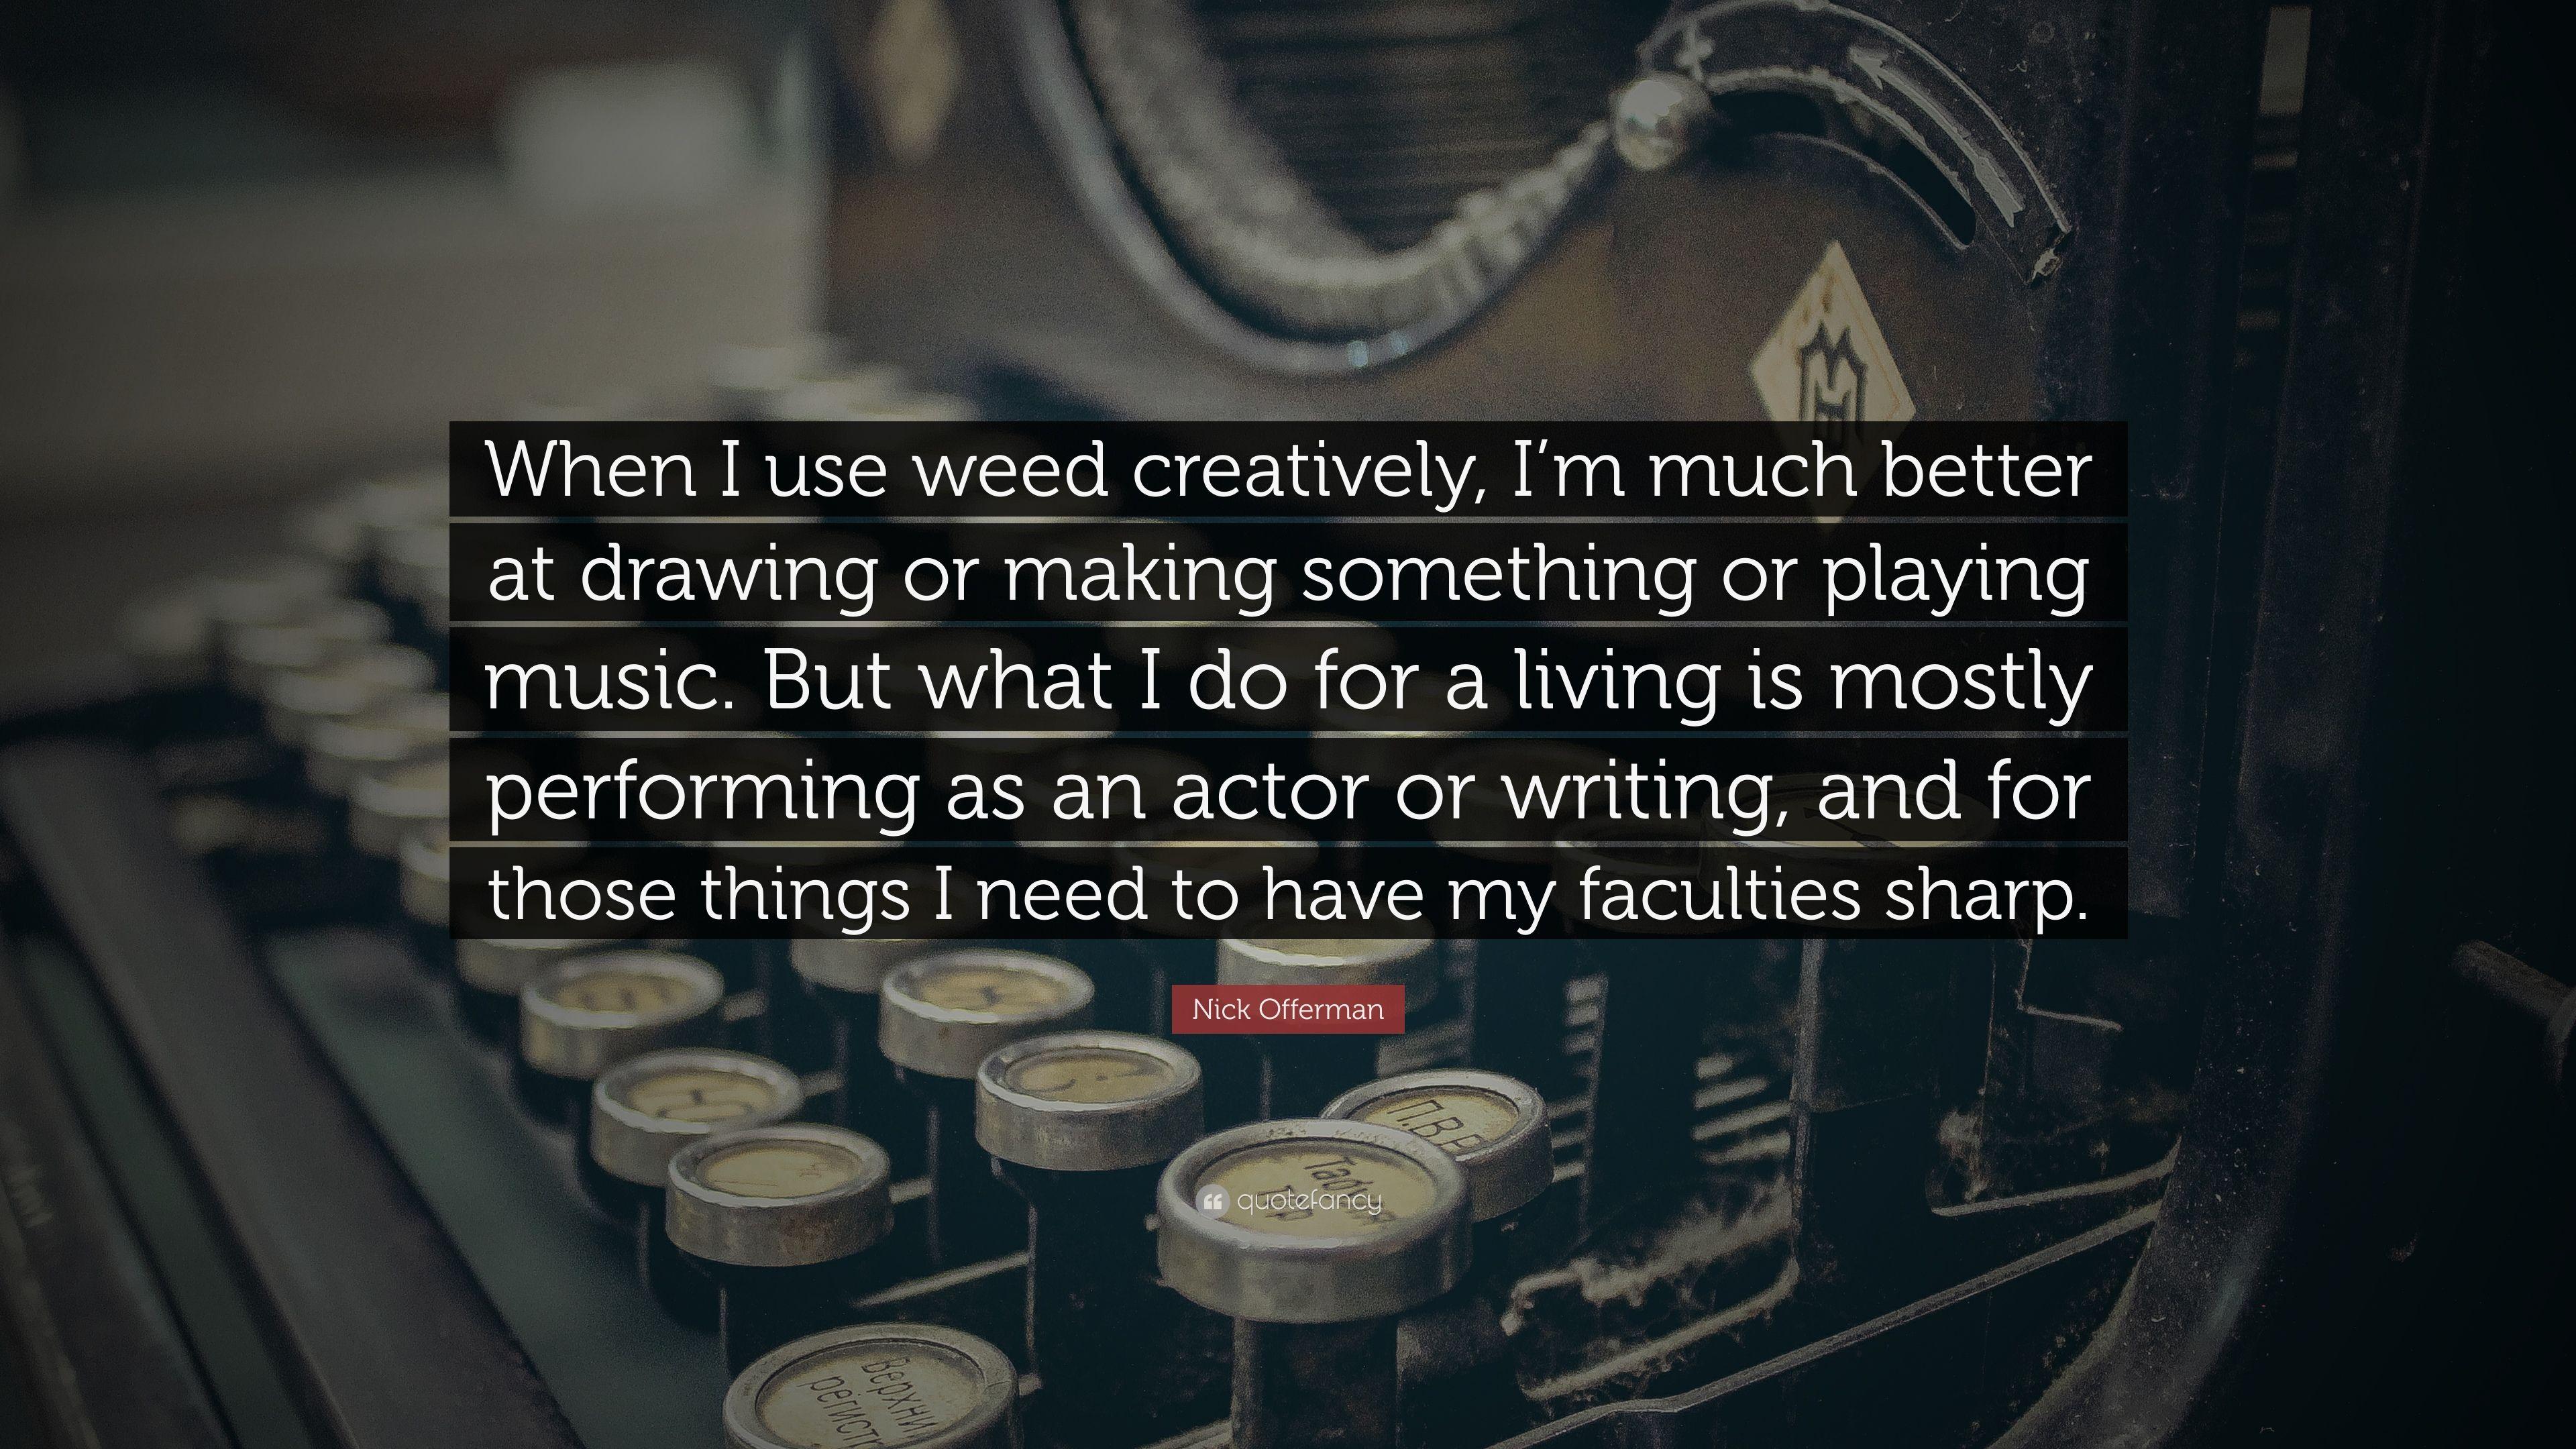 Nick Offerman Quote: “When I use weed creatively, I'm much better at